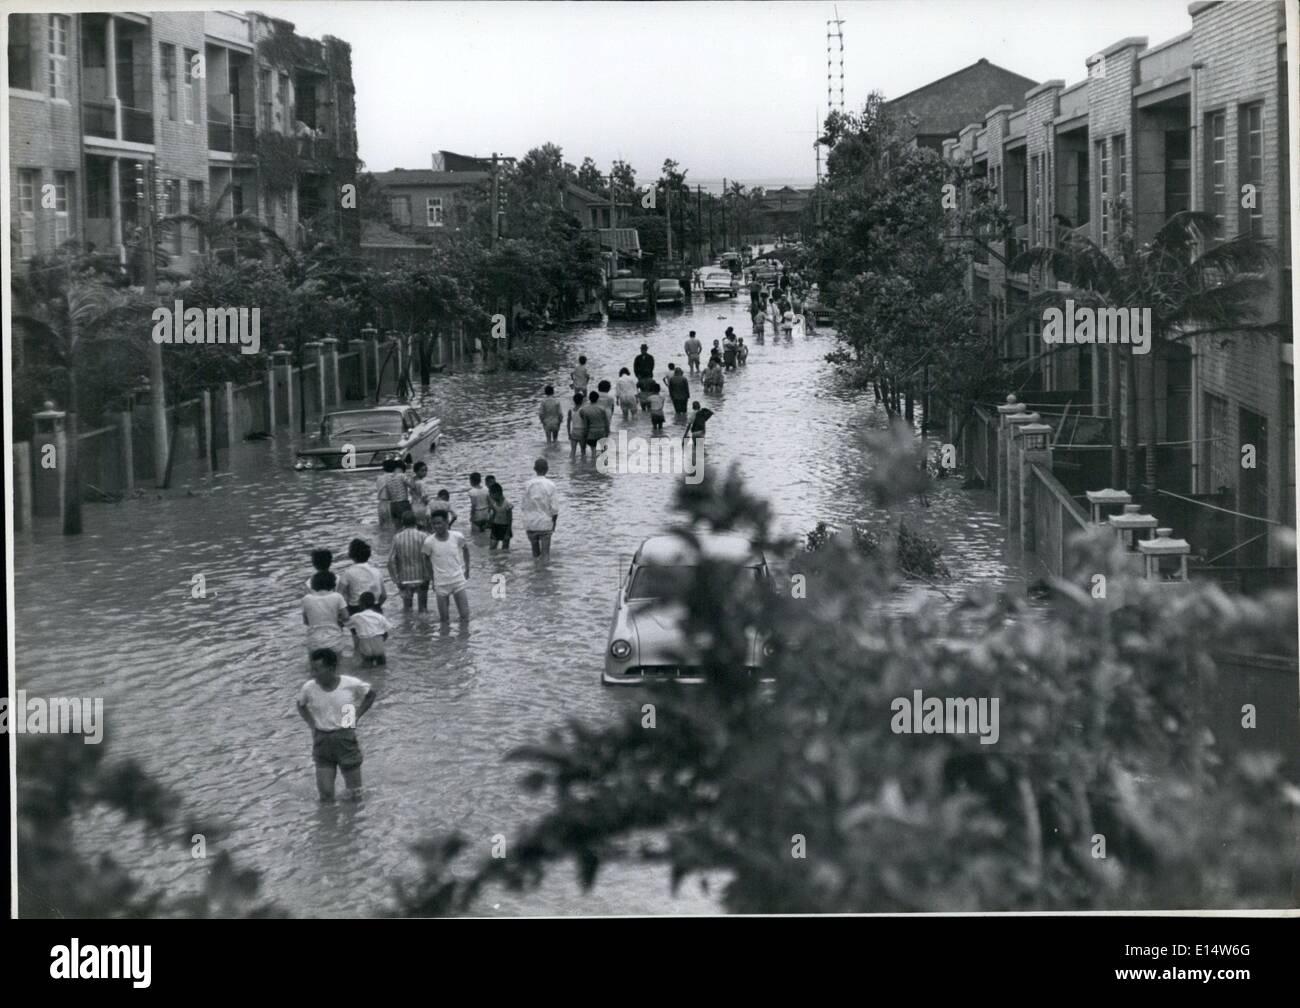 Apr. 18, 2012 - Typhoon Amy floods Taipei: A flooded Taipei street with the inhabitants wading about near abandoned cars. Stock Photo